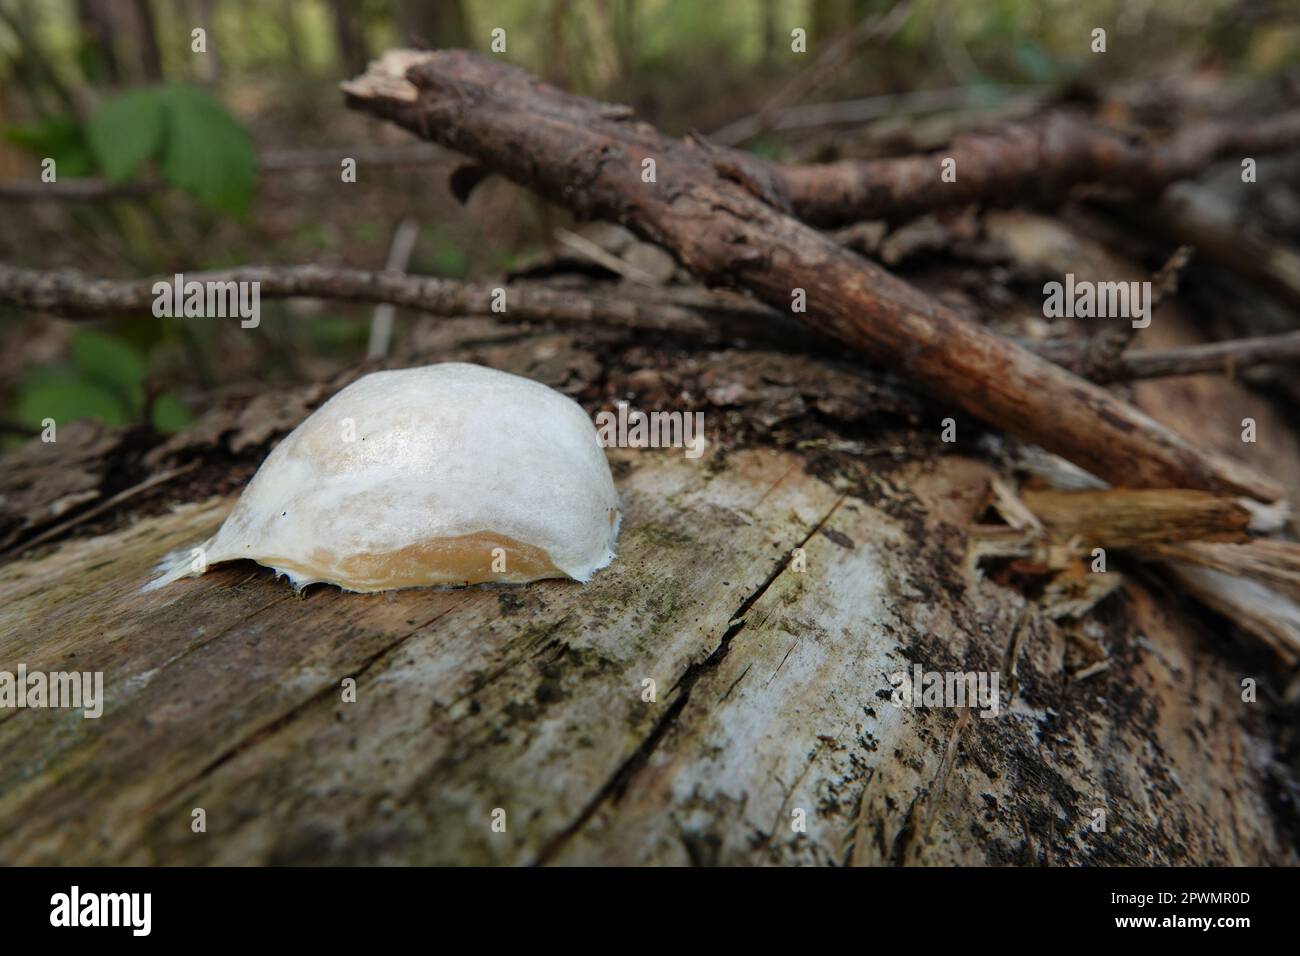 Natural Closeup on a white slime mould or Myxogastria, Enteridium lycoperdon or False Puffball in the forest Stock Photo